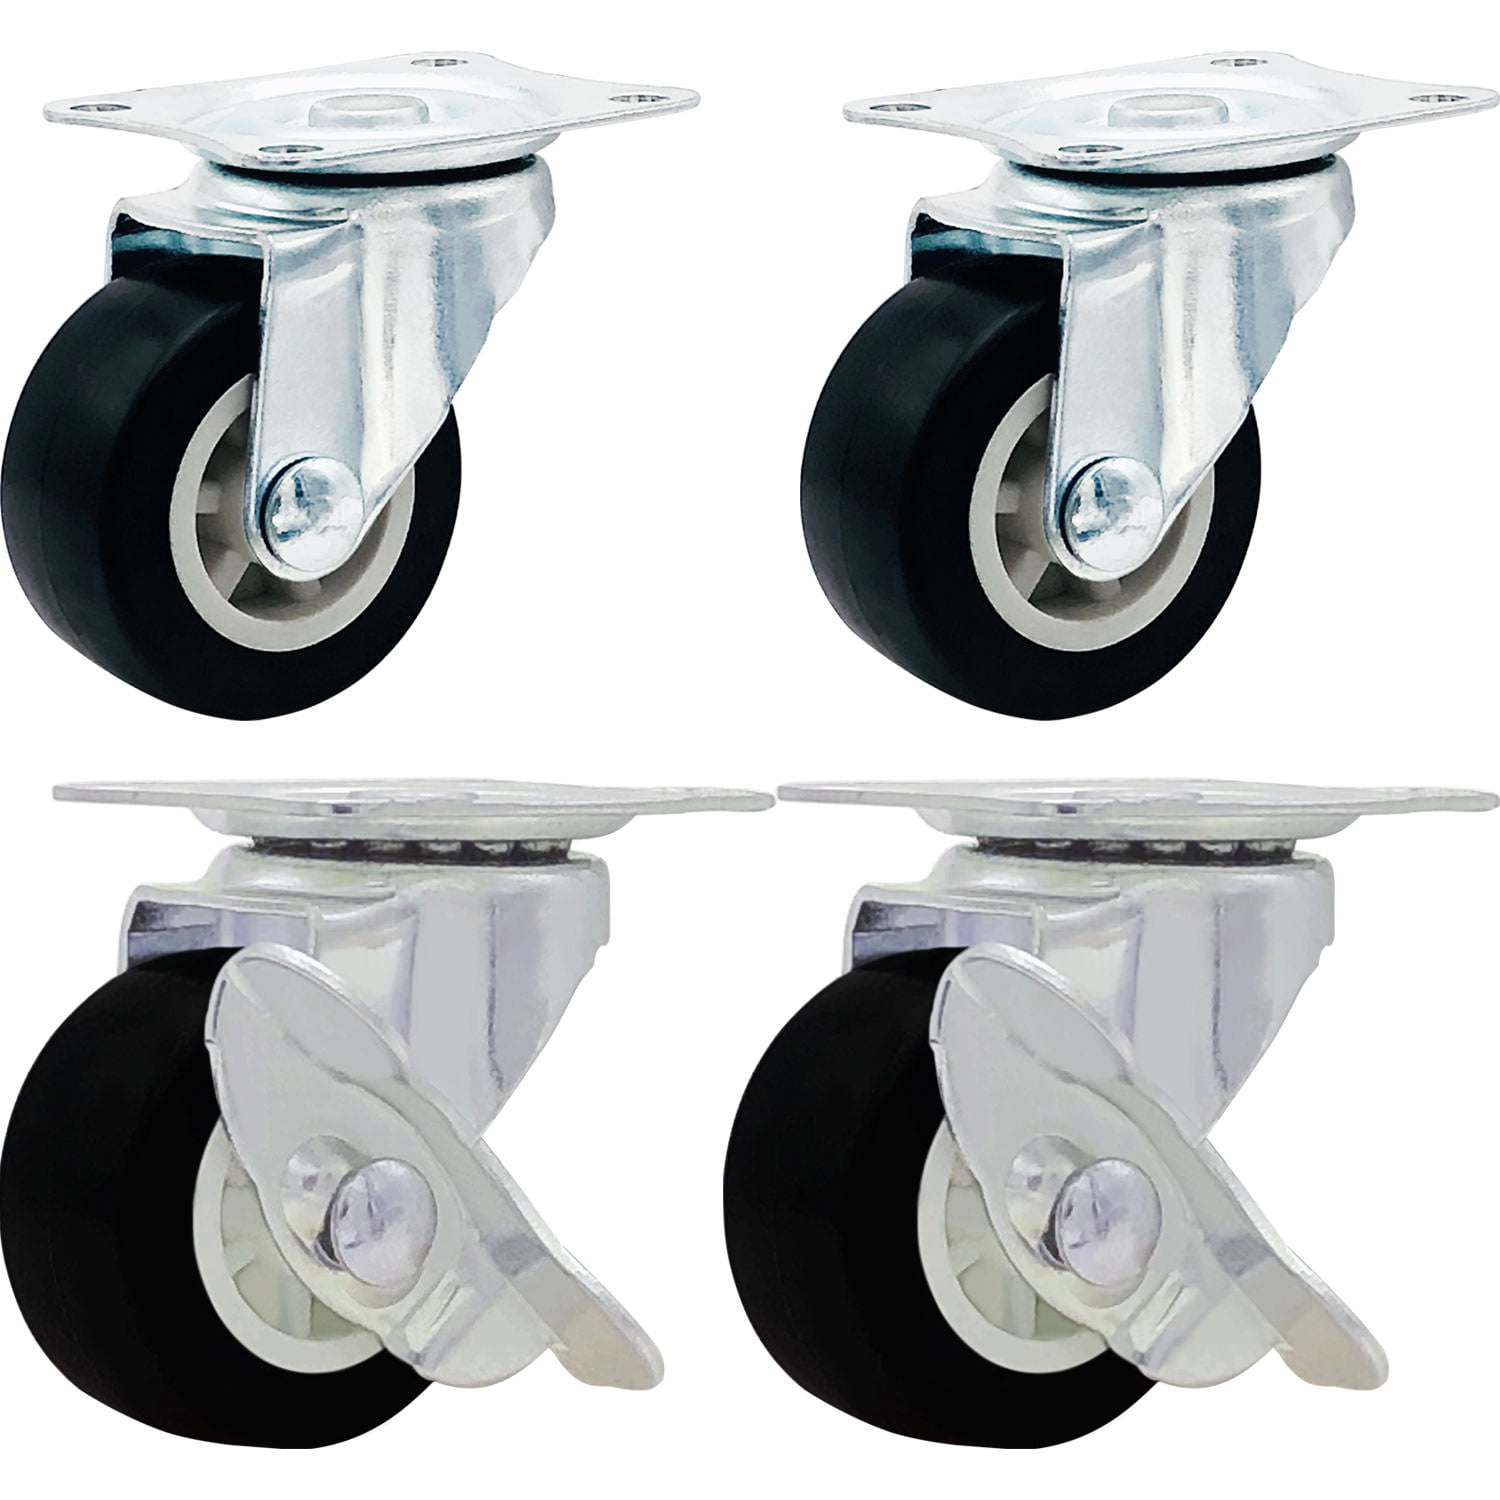 Almencla 16 Pack 1 inch Low Profile Casters Wheels Soft Rubber Swivel Caster with 360 Degree Top Plate for Shopping Carts Trolley etc. 